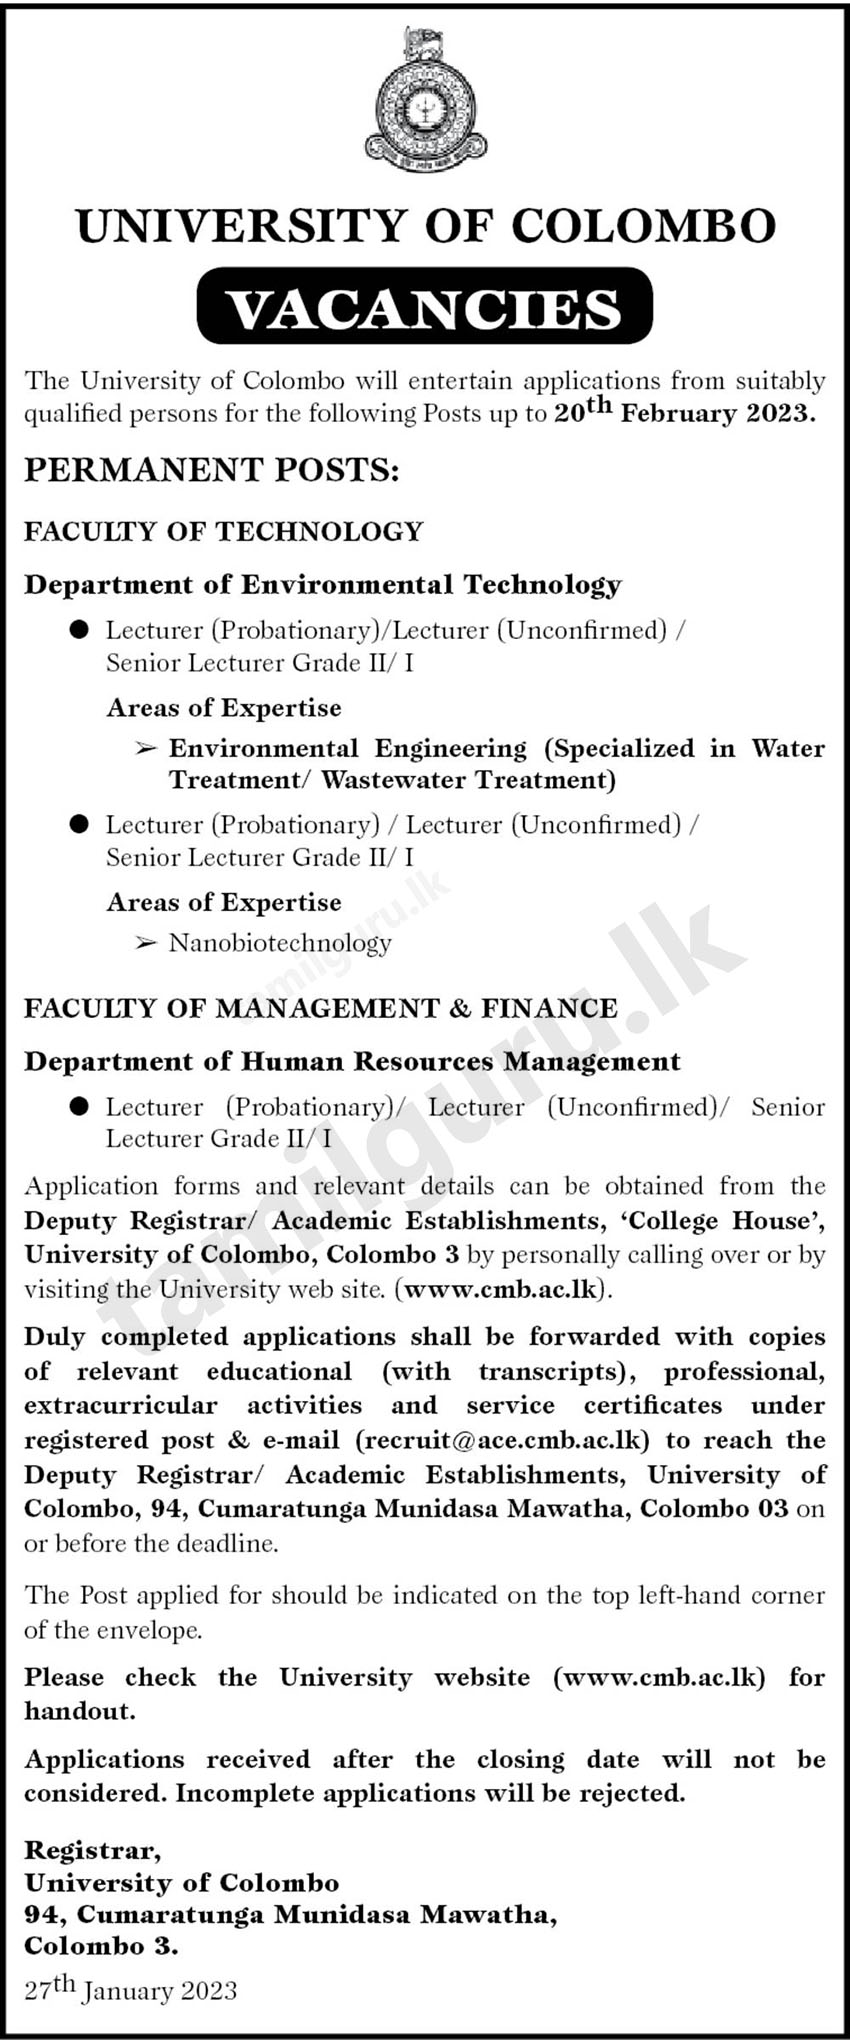 Lecturer Vacancies (Permanent Posts) at the University of Colombo - 2023 Post of Lecturer (Probationary)/ Lecturer (Unconfirmed)/ Senior Lecturer Grade II/ I